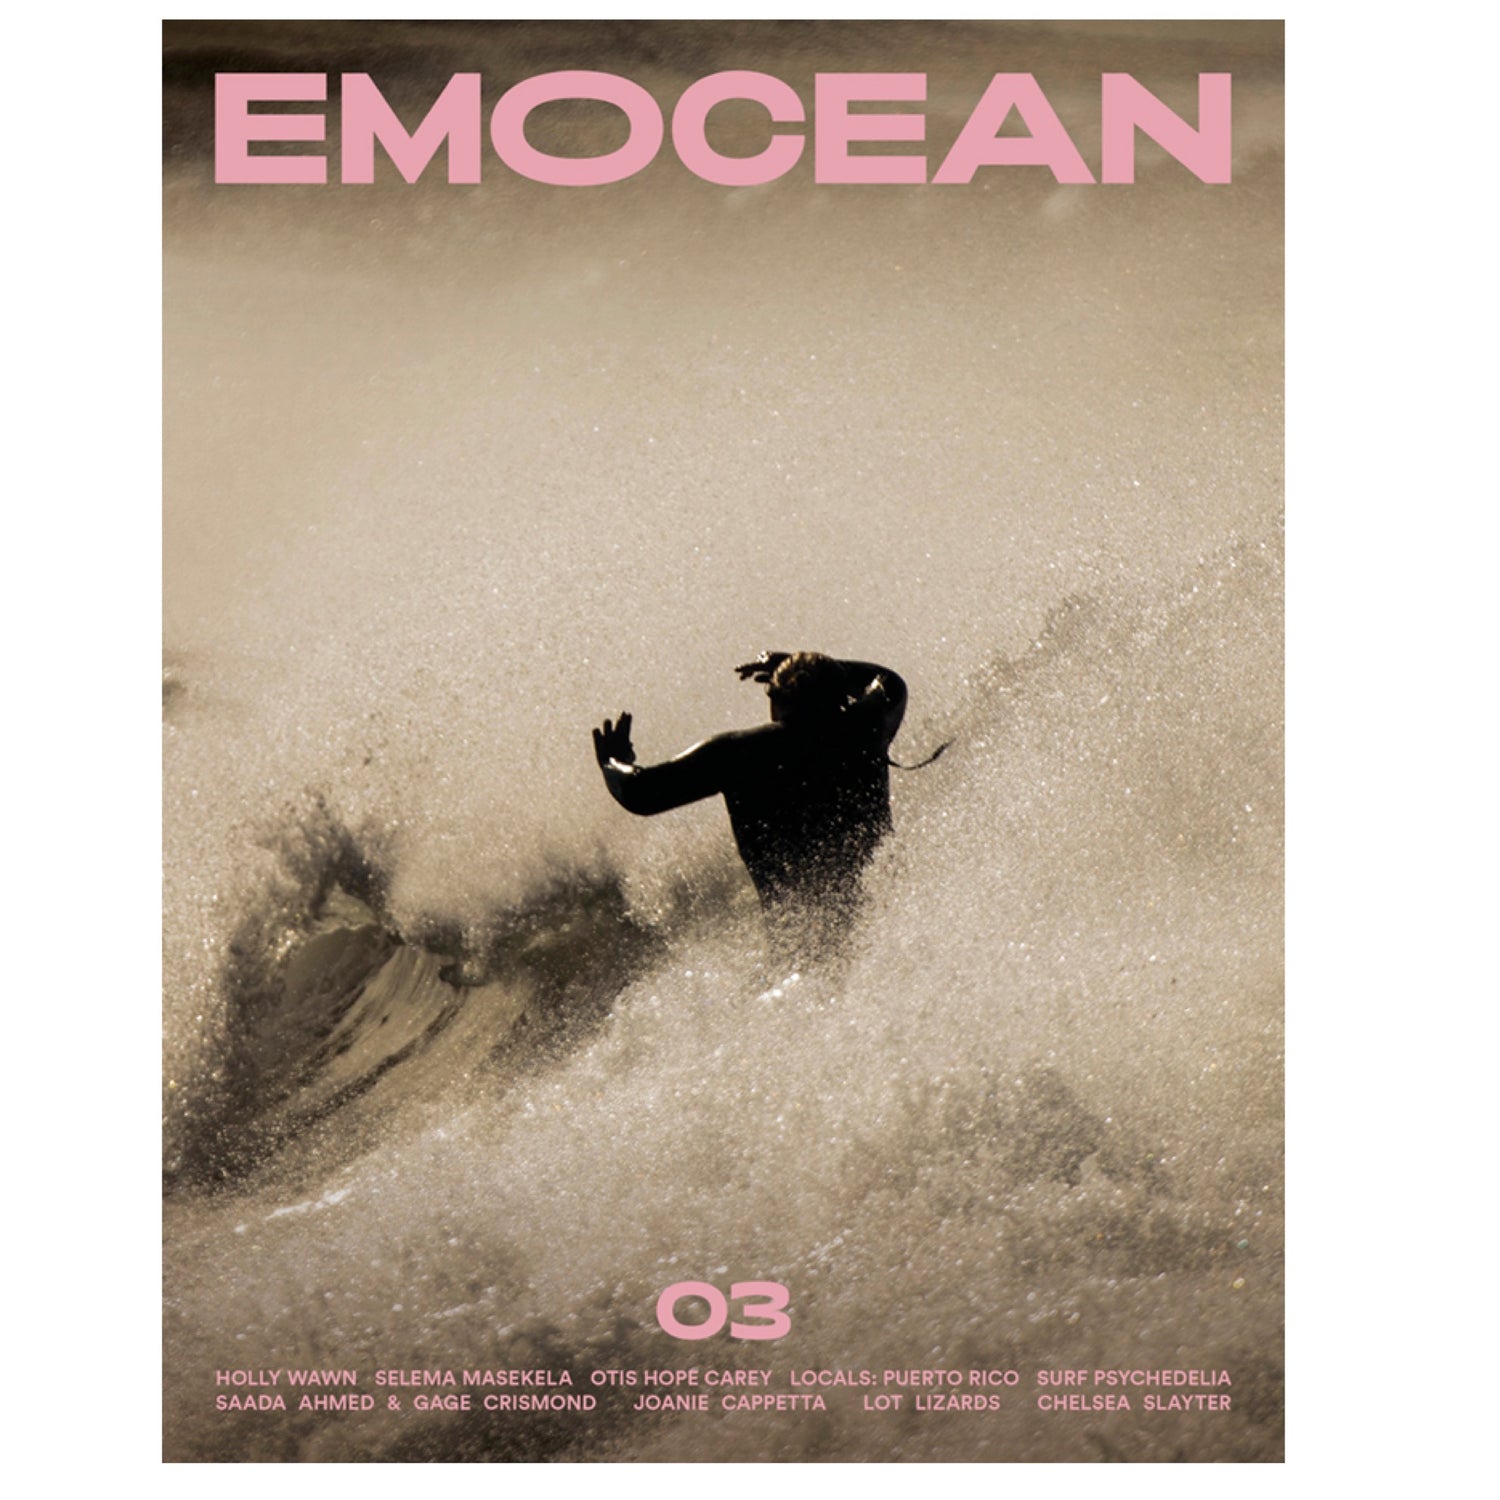 EMOCEAN Magazin - Issue #03 "Connection" - REBEL FIN CO.